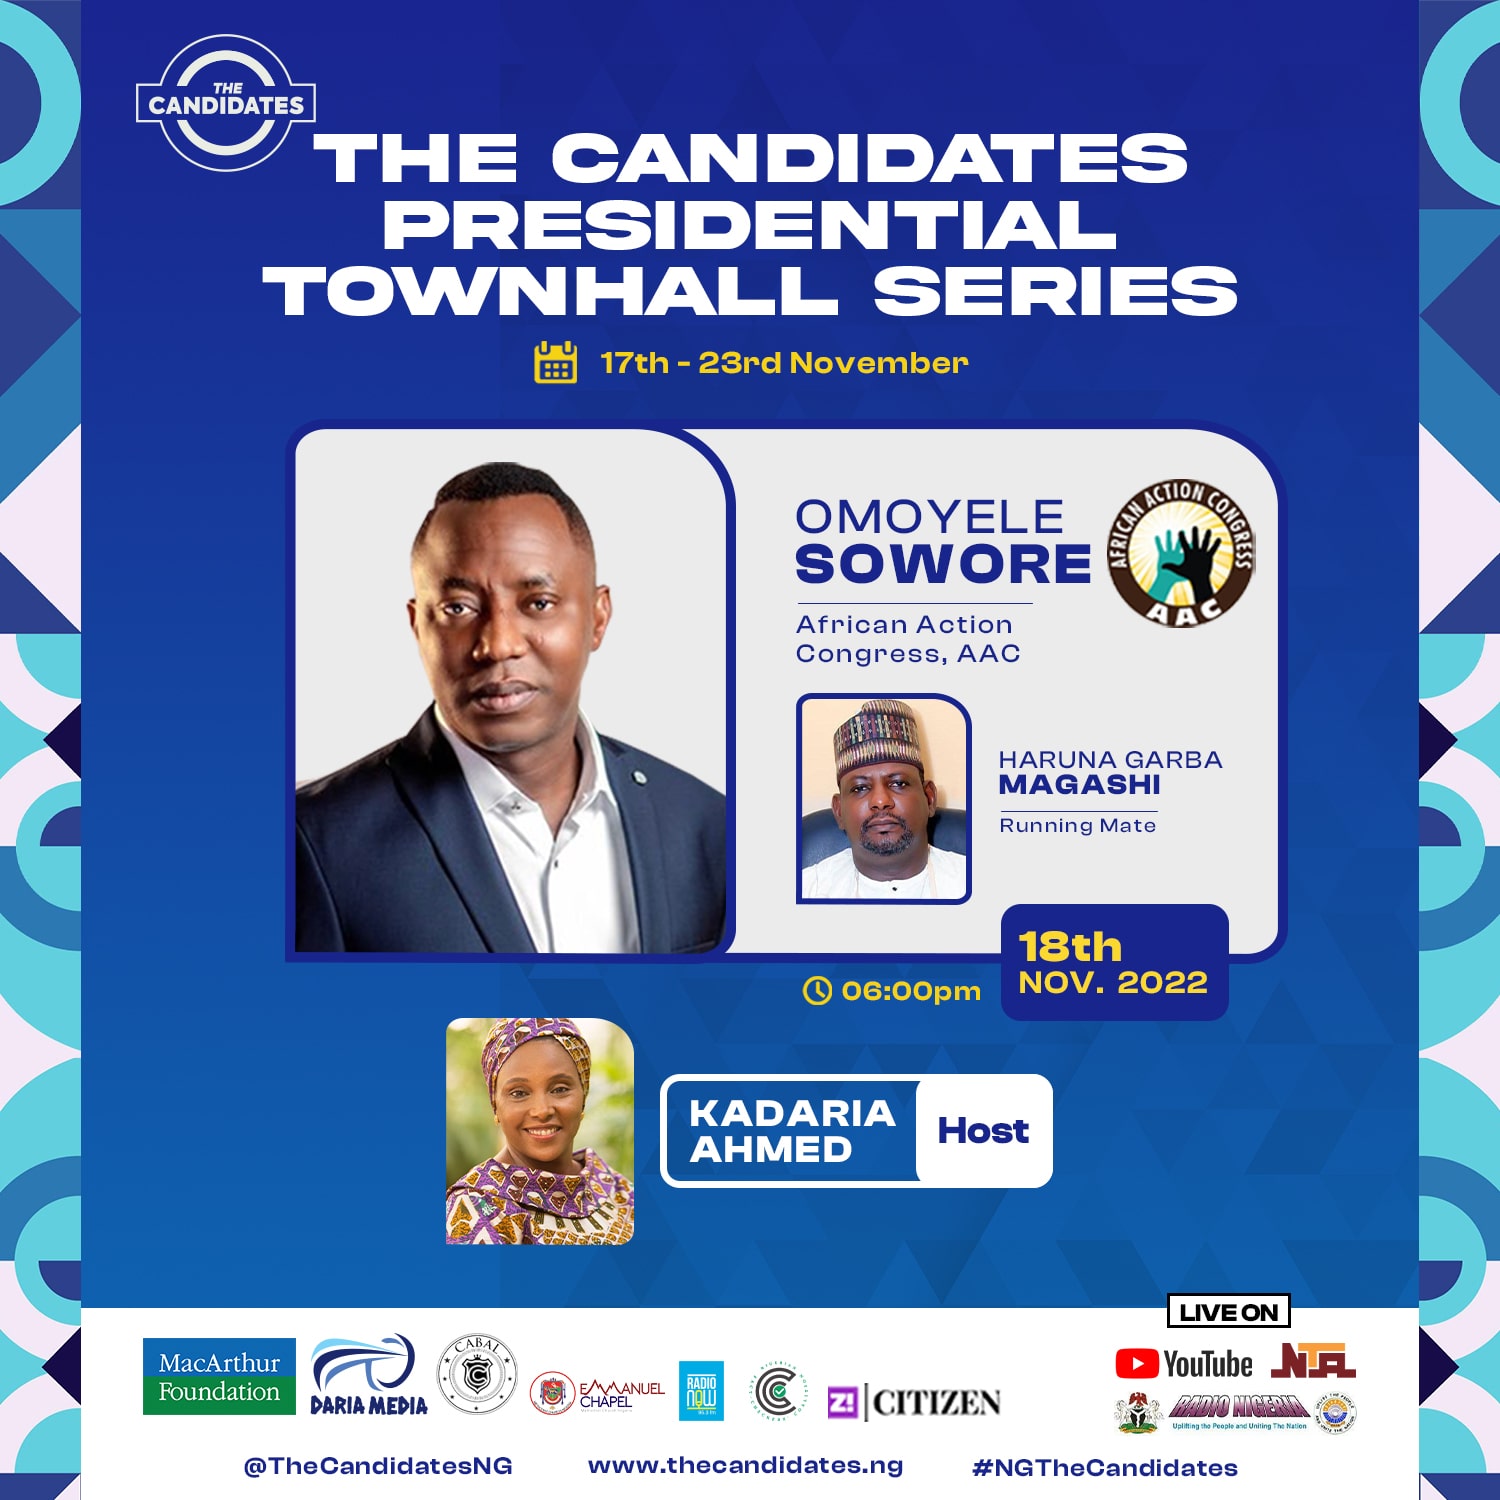 Four Highlights of Omoyele Sowore’s Town Hall at ‘The Candidates’